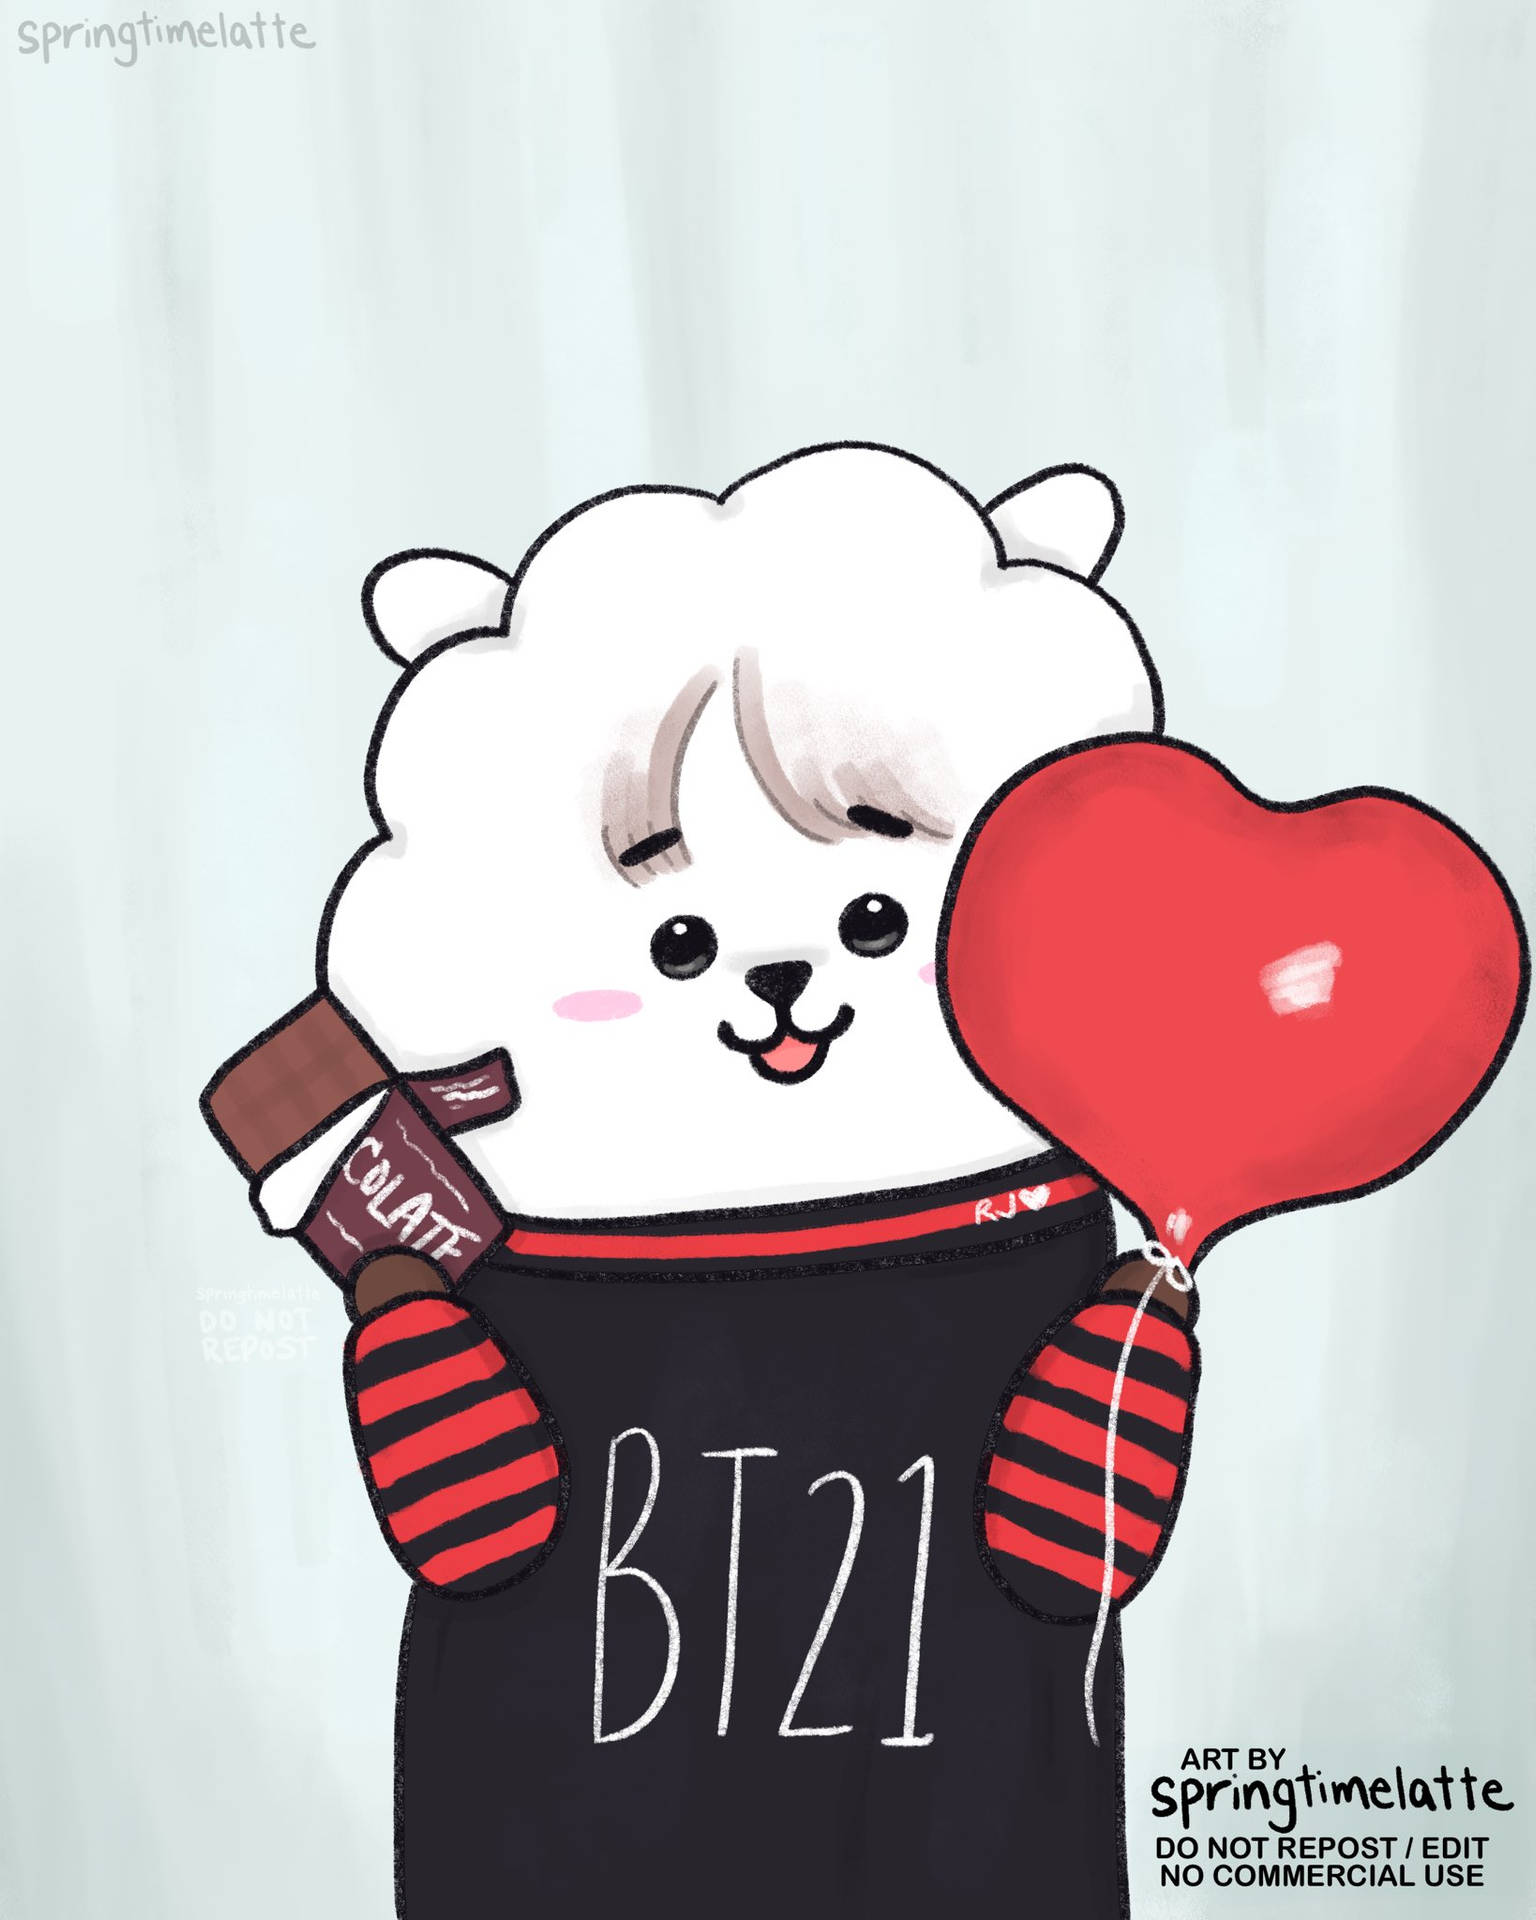 Caption: Cheerful Rj Bt21 Showing Off Its Charming Smile Background